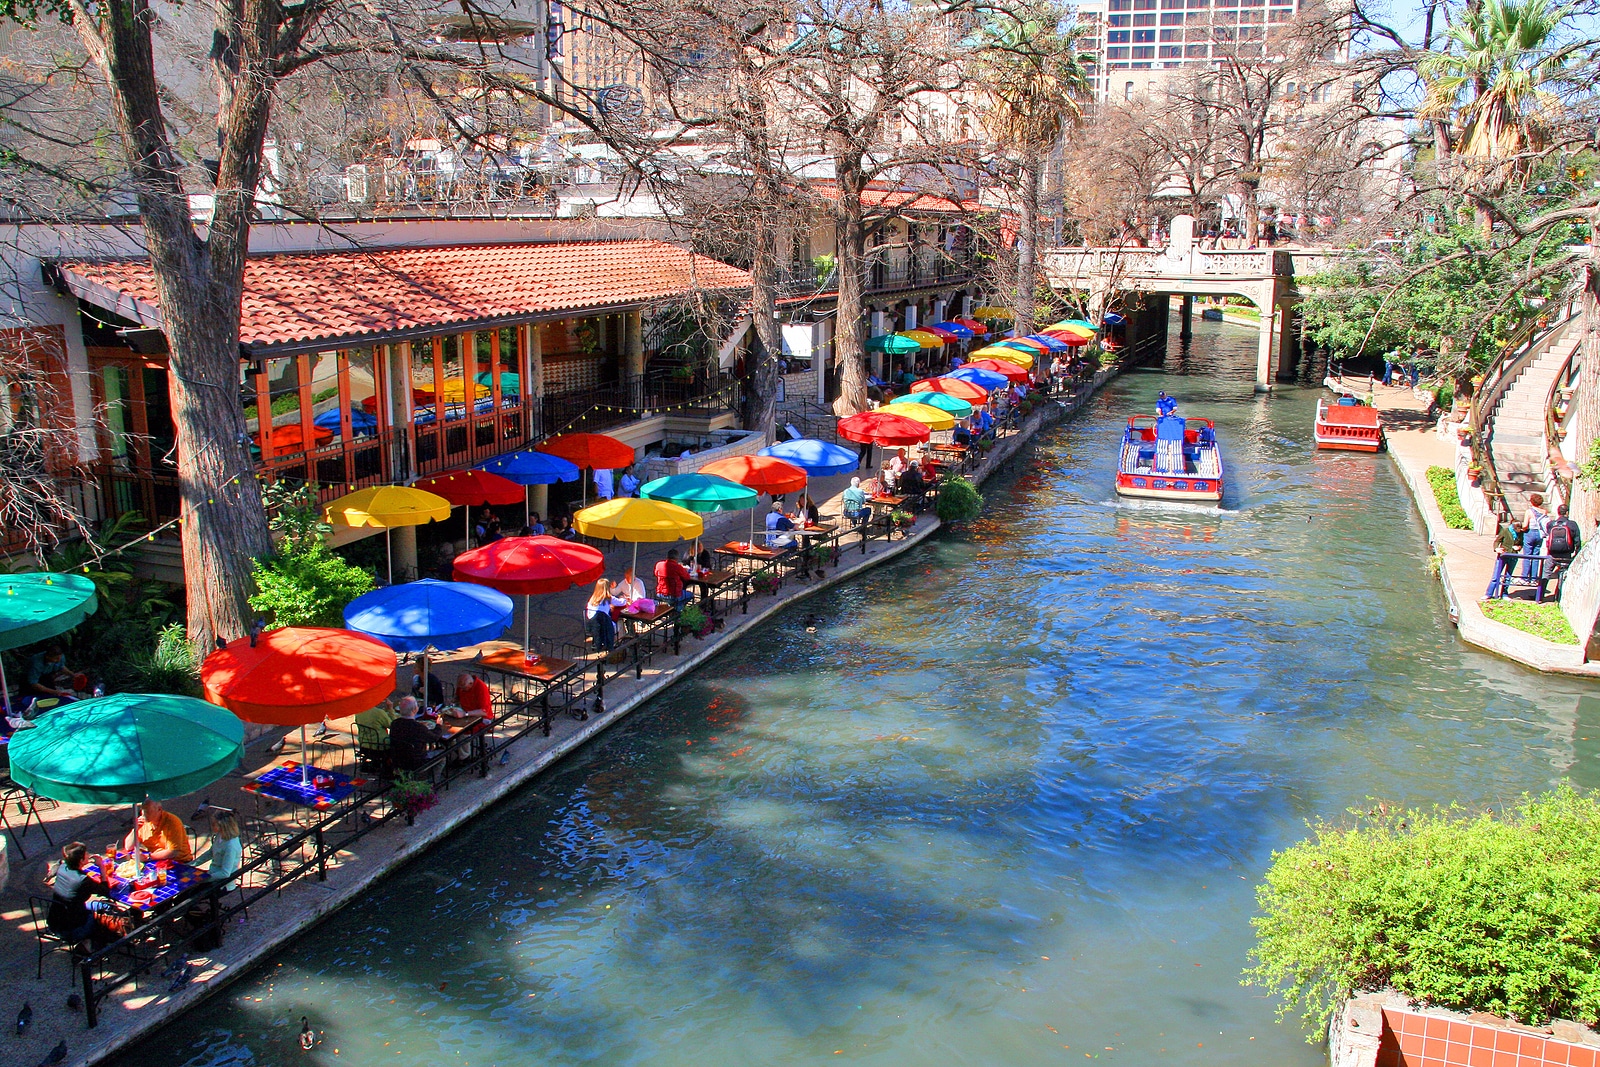 the San Antonio riverwalk and its many colorful sites provided by Tripps Plus Las Vegas